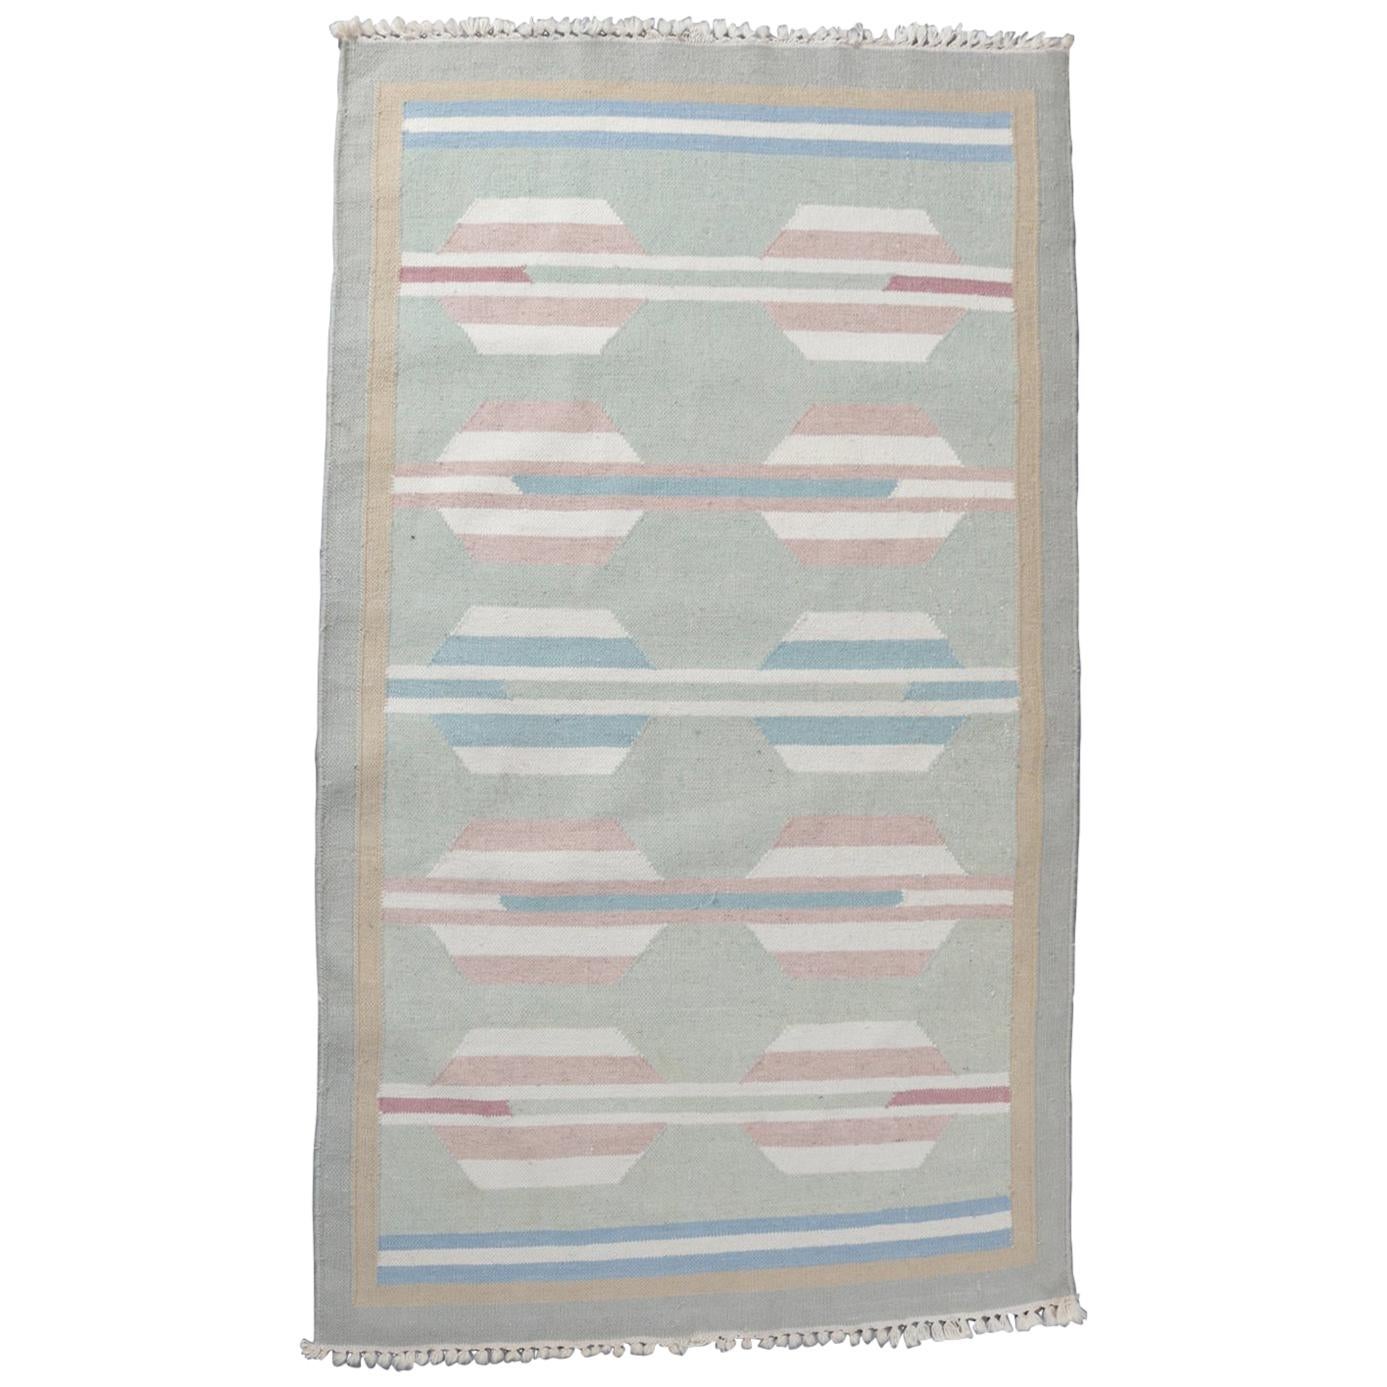 Native American Indian Navajo Style Area Rug in Pastels, 20th Century